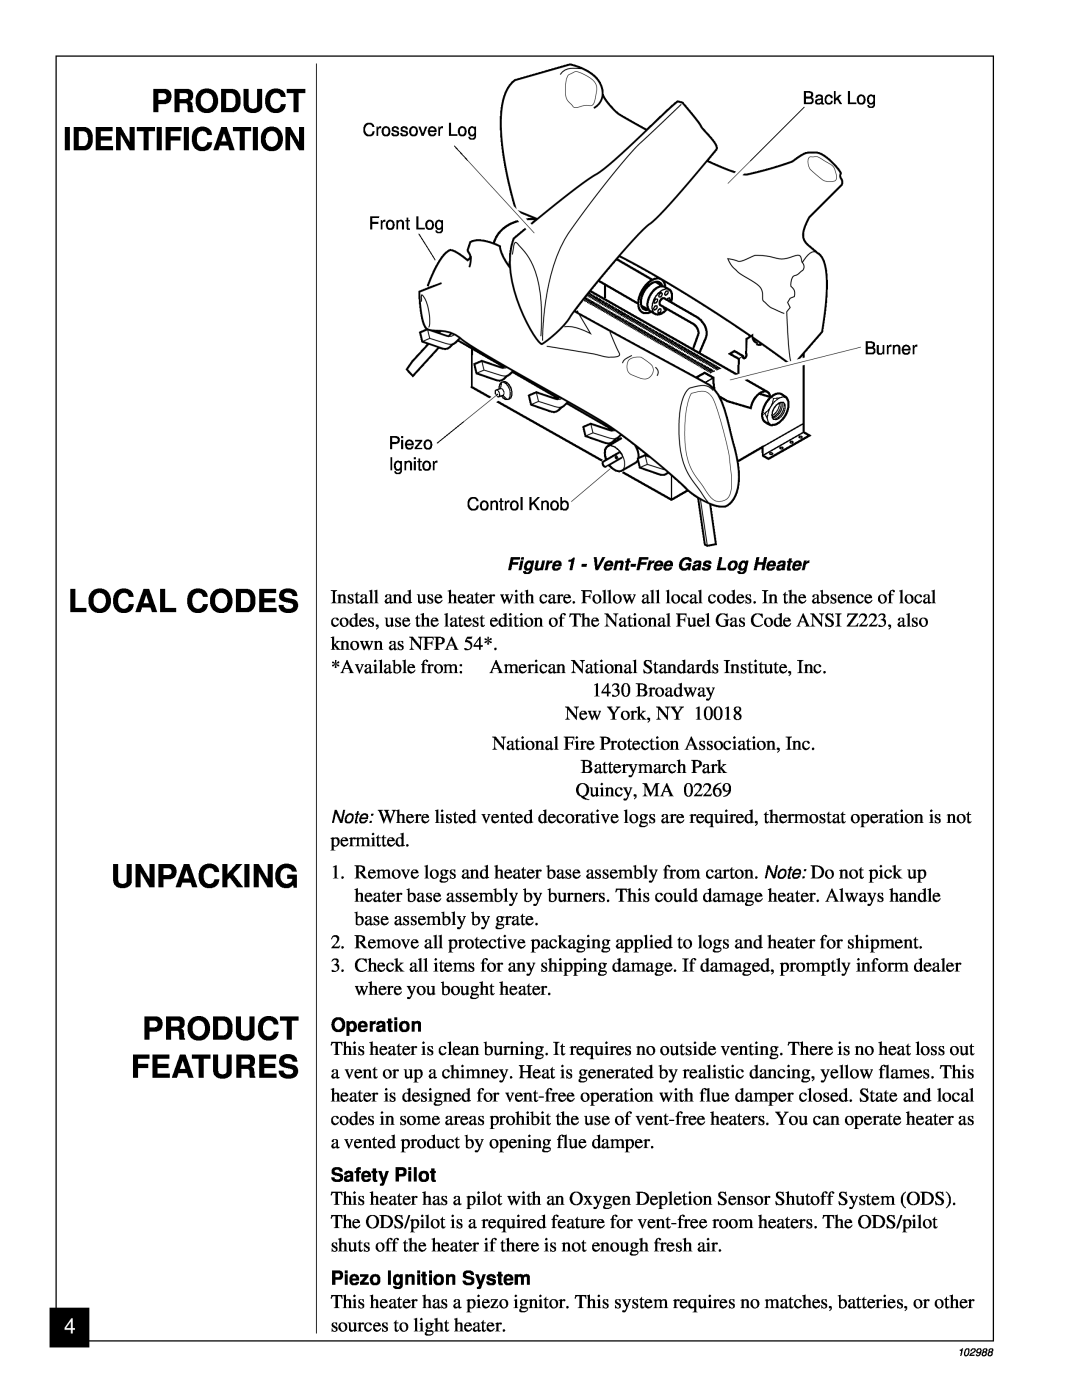 Desa CGS2718N installation manual Local Codes Unpacking Product Features, Product Identification 